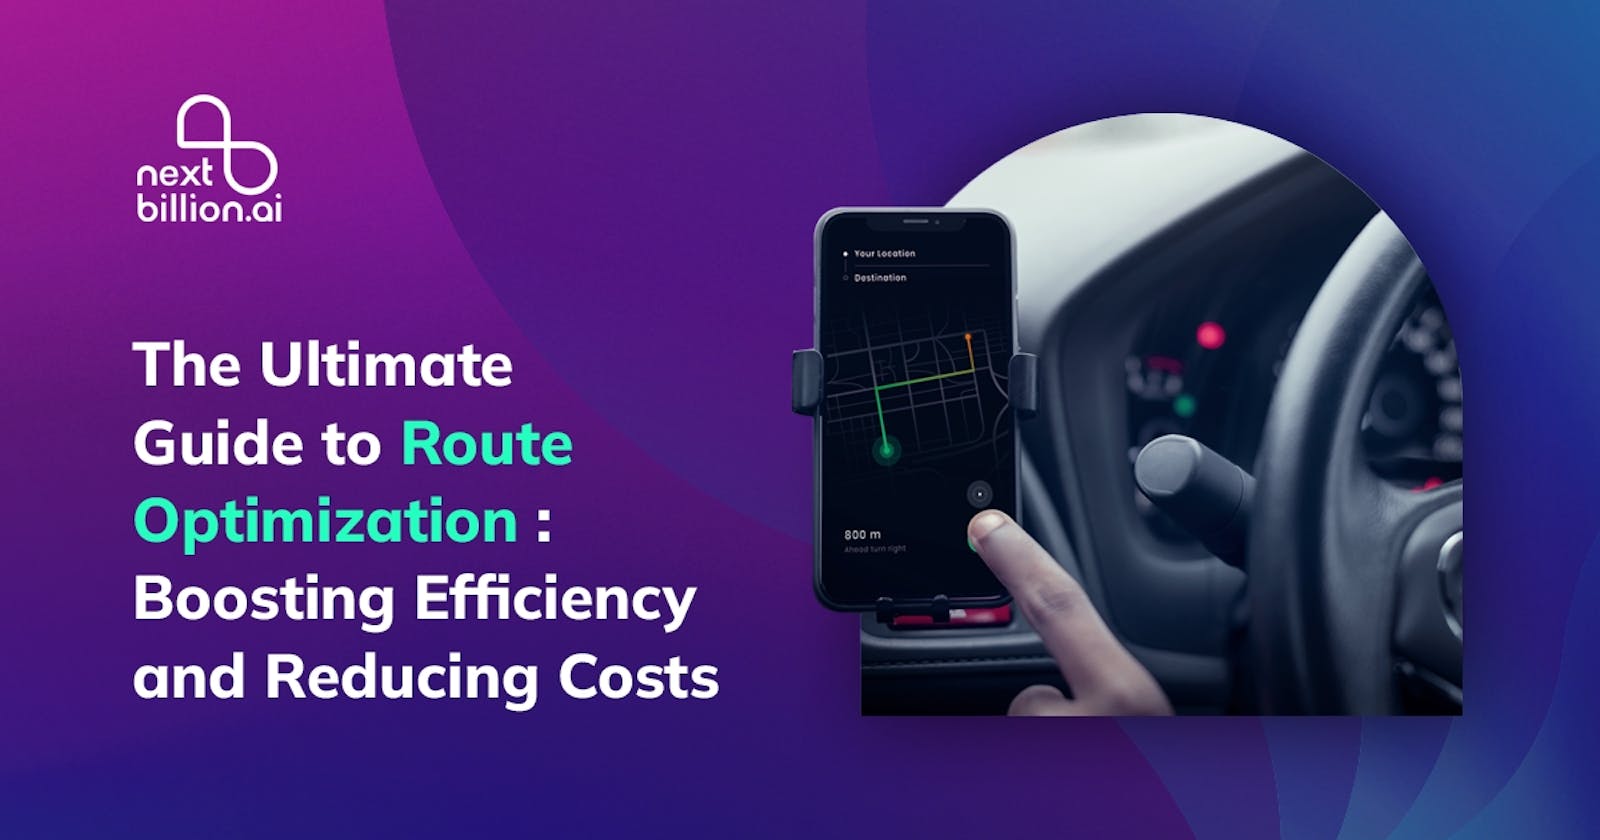 The Ultimate Guide to Route Optimization: Boosting Efficiency and Reducing Costs